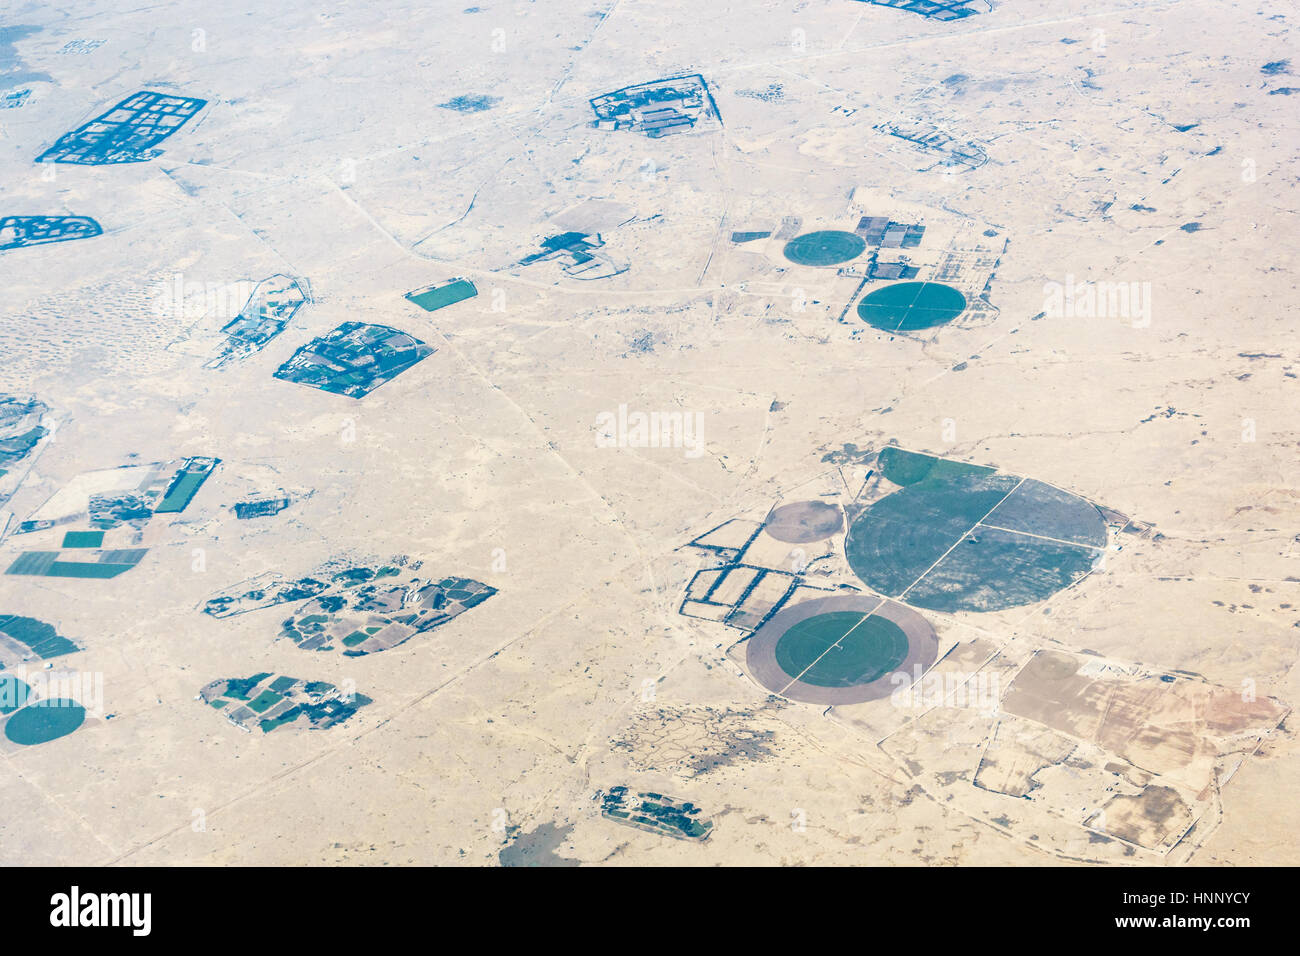 Aerial view of circular fields in the desert in Qatar Stock Photo